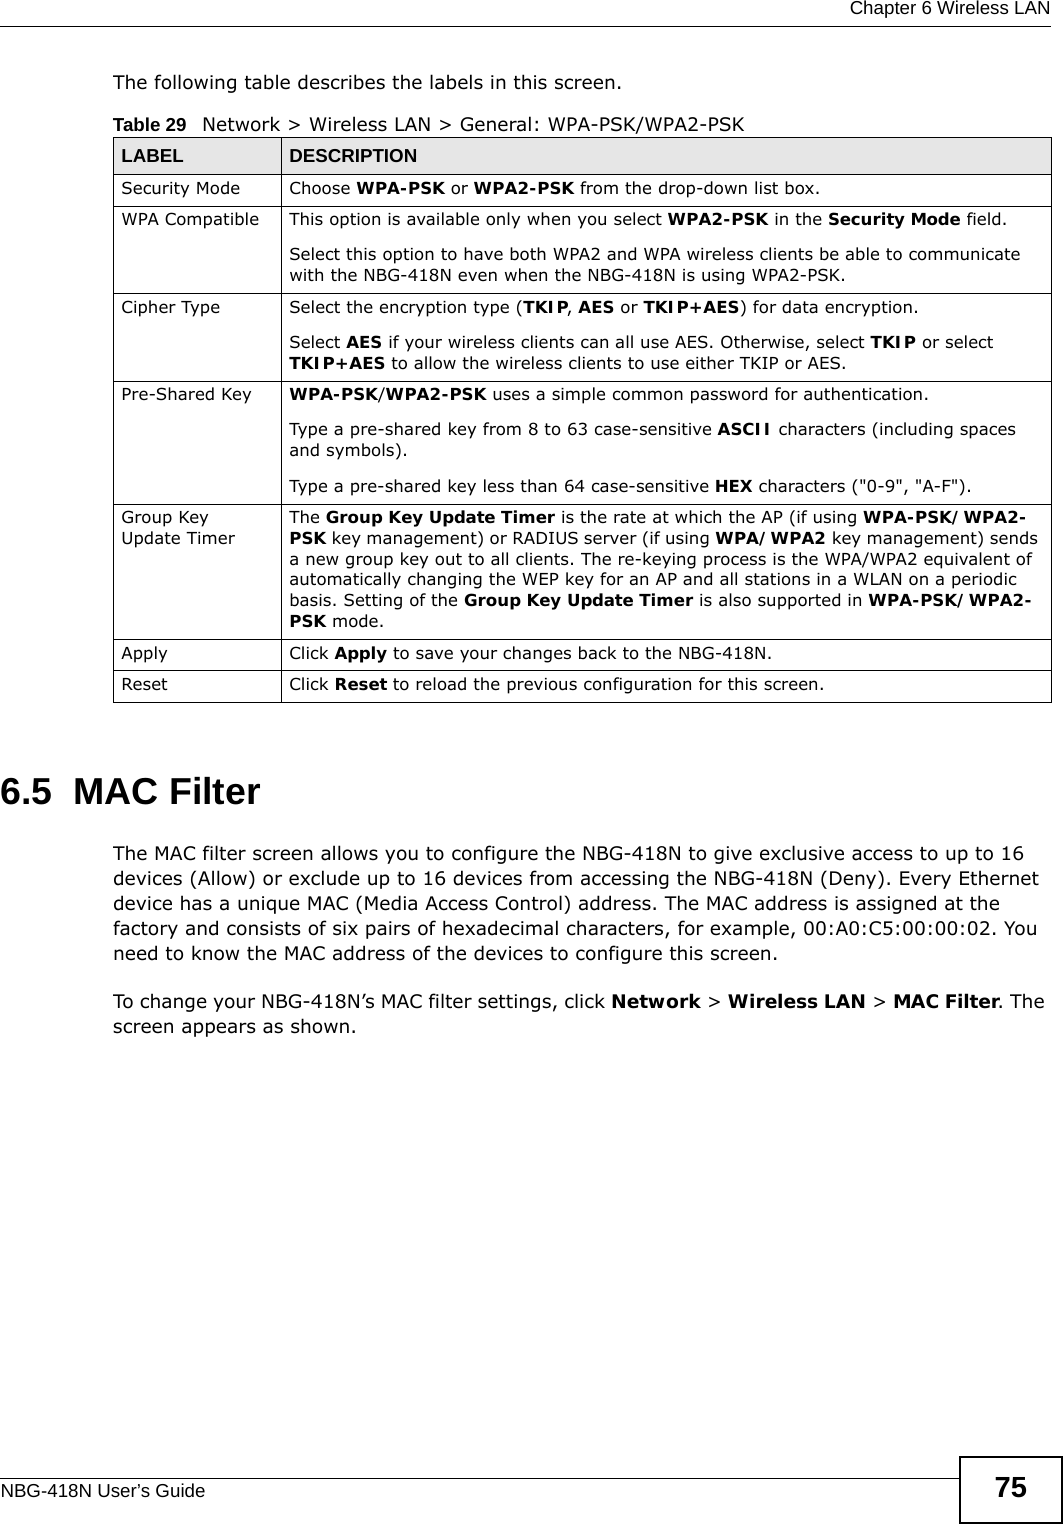  Chapter 6 Wireless LANNBG-418N User’s Guide 75The following table describes the labels in this screen.6.5  MAC FilterThe MAC filter screen allows you to configure the NBG-418N to give exclusive access to up to 16 devices (Allow) or exclude up to 16 devices from accessing the NBG-418N (Deny). Every Ethernet device has a unique MAC (Media Access Control) address. The MAC address is assigned at the factory and consists of six pairs of hexadecimal characters, for example, 00:A0:C5:00:00:02. You need to know the MAC address of the devices to configure this screen.To change your NBG-418N’s MAC filter settings, click Network &gt; Wireless LAN &gt; MAC Filter. The screen appears as shown.Table 29   Network &gt; Wireless LAN &gt; General: WPA-PSK/WPA2-PSKLABEL DESCRIPTIONSecurity Mode Choose WPA-PSK or WPA2-PSK from the drop-down list box.WPA Compatible This option is available only when you select WPA2-PSK in the Security Mode field.Select this option to have both WPA2 and WPA wireless clients be able to communicate with the NBG-418N even when the NBG-418N is using WPA2-PSK.Cipher Type  Select the encryption type (TKIP, AES or TKIP+AES) for data encryption.Select AES if your wireless clients can all use AES. Otherwise, select TKIP or select TKIP+AES to allow the wireless clients to use either TKIP or AES.Pre-Shared Key  WPA-PSK/WPA2-PSK uses a simple common password for authentication.Type a pre-shared key from 8 to 63 case-sensitive ASCII characters (including spaces and symbols).Type a pre-shared key less than 64 case-sensitive HEX characters (&quot;0-9&quot;, &quot;A-F&quot;).Group Key Update TimerThe Group Key Update Timer is the rate at which the AP (if using WPA-PSK/WPA2-PSK key management) or RADIUS server (if using WPA/WPA2 key management) sends a new group key out to all clients. The re-keying process is the WPA/WPA2 equivalent of automatically changing the WEP key for an AP and all stations in a WLAN on a periodic basis. Setting of the Group Key Update Timer is also supported in WPA-PSK/WPA2-PSK mode. Apply Click Apply to save your changes back to the NBG-418N.Reset Click Reset to reload the previous configuration for this screen.